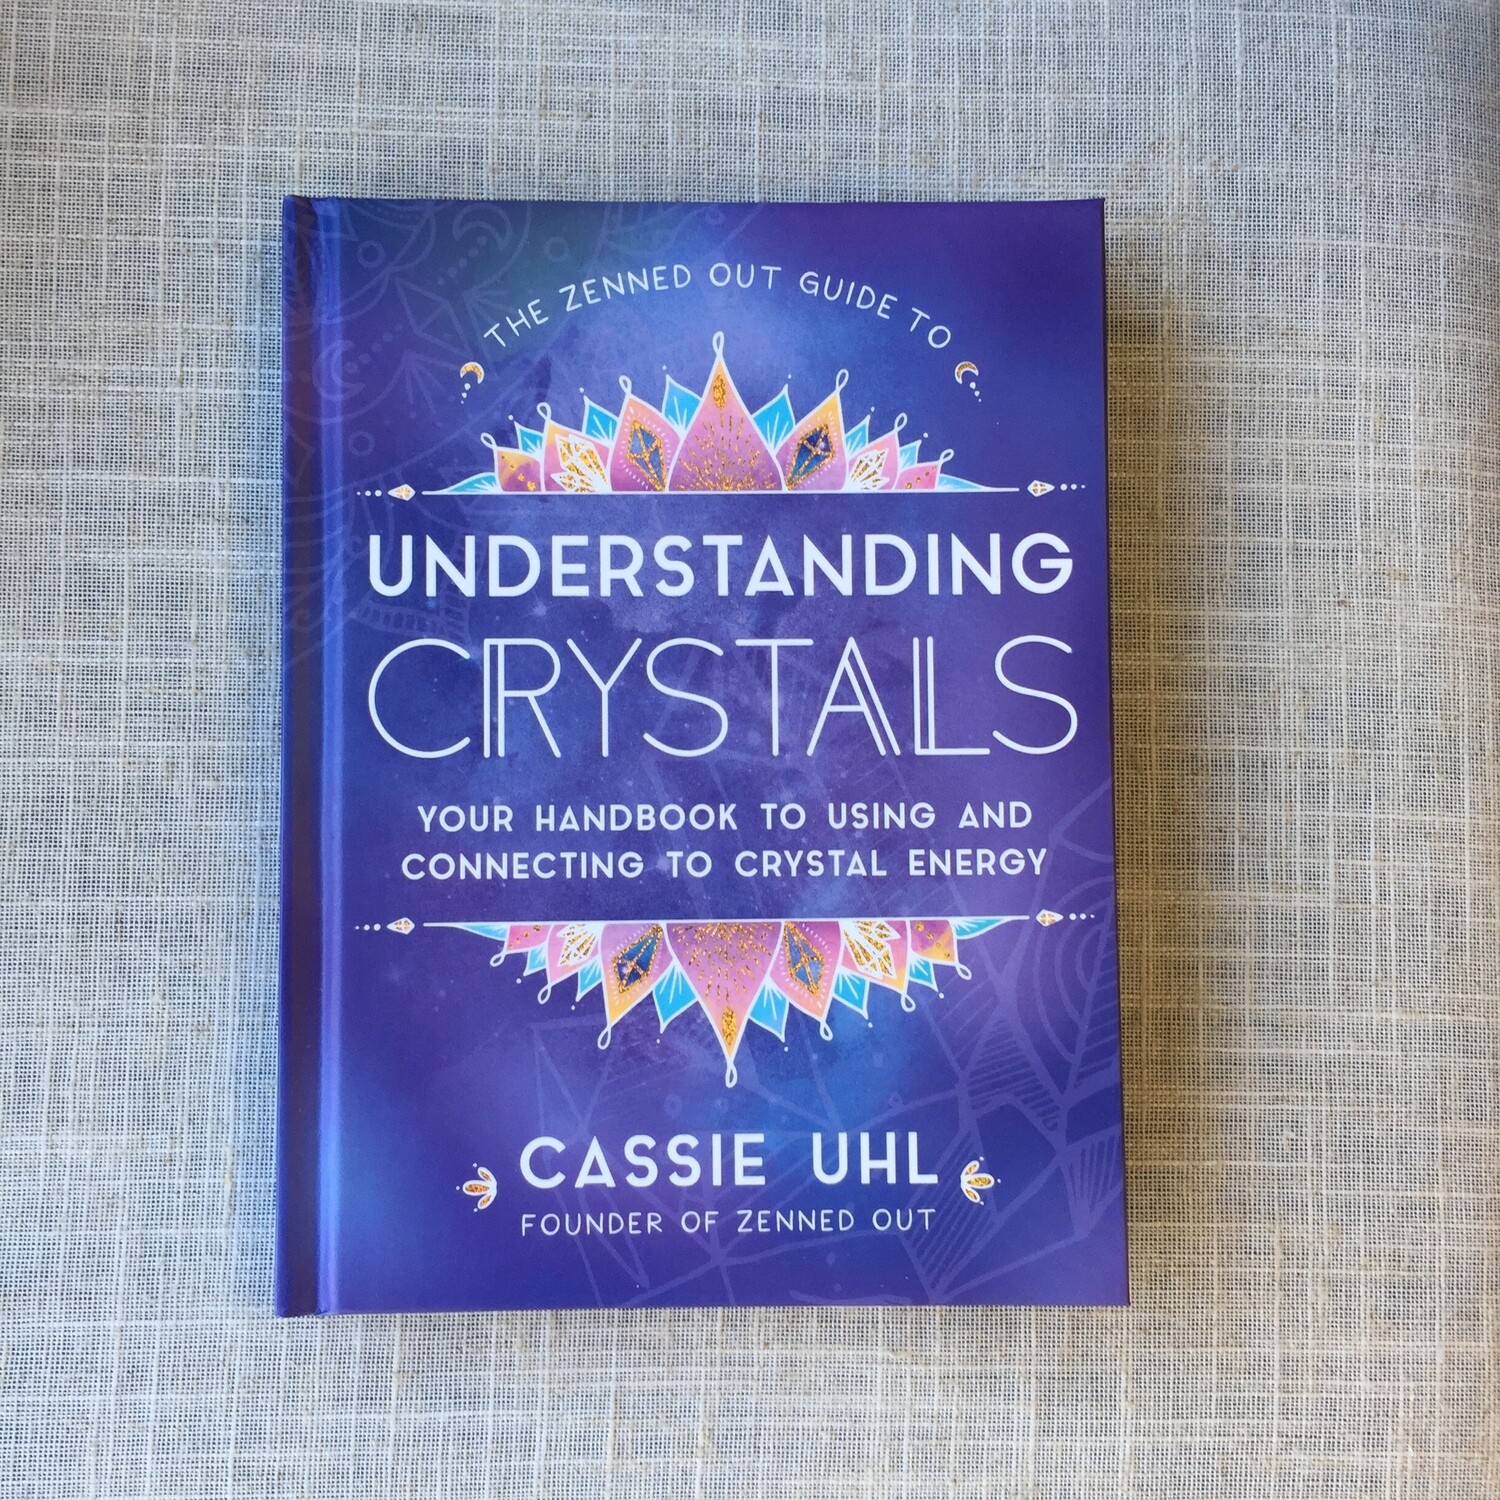 The Zenned Out Guide to Understanding Crystals Hardcover